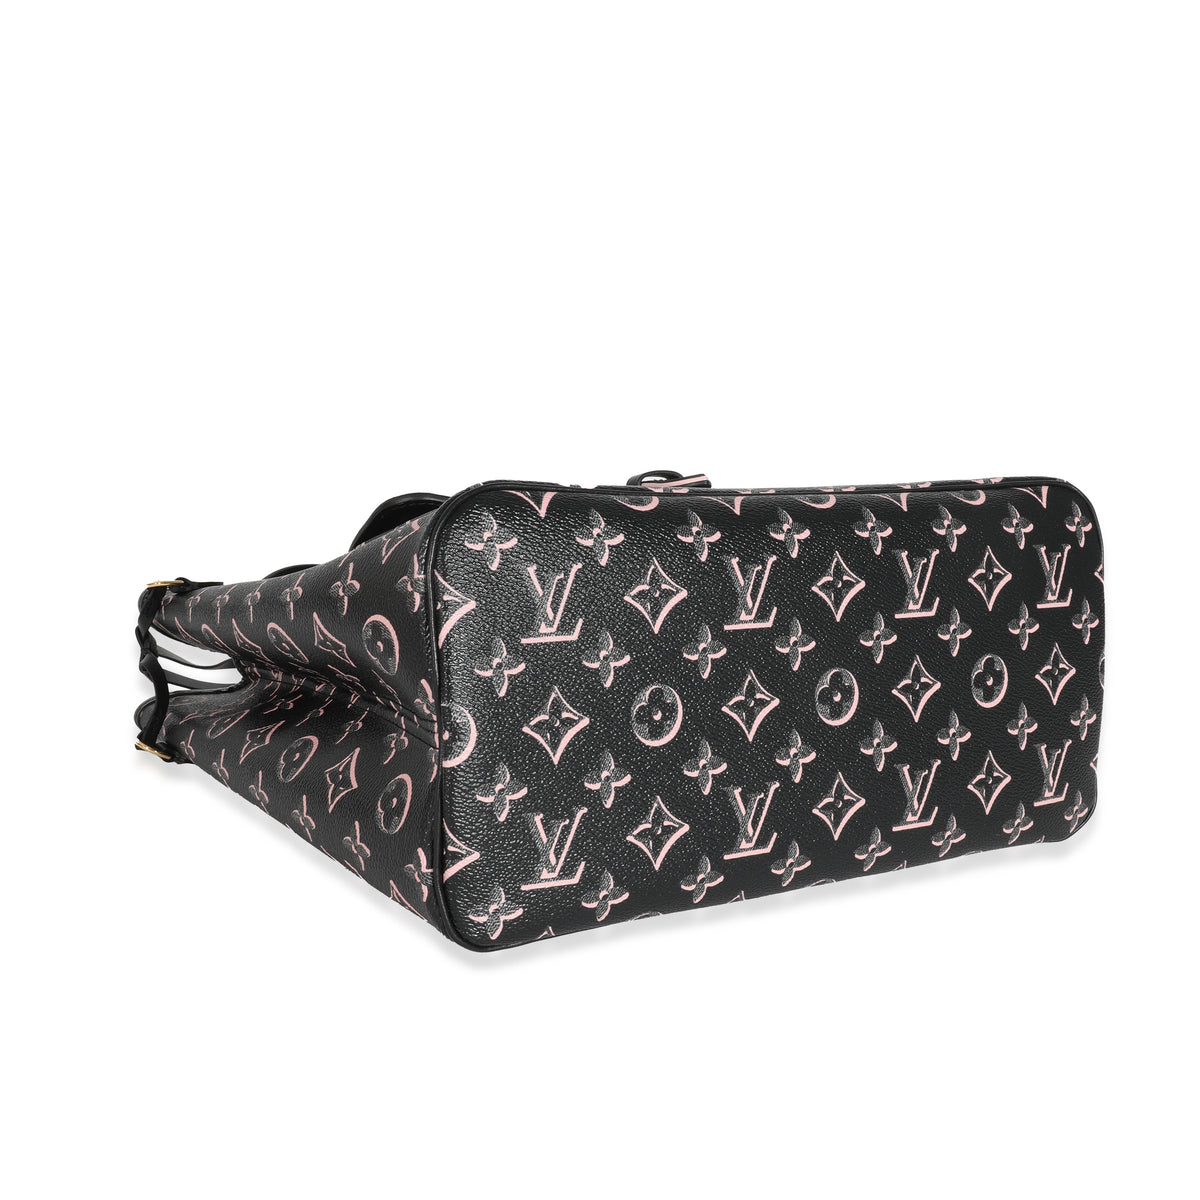 Louis Vuitton Neverfull MM Tote Bag Monogram Canvas In Black Pink - Praise  To Heaven